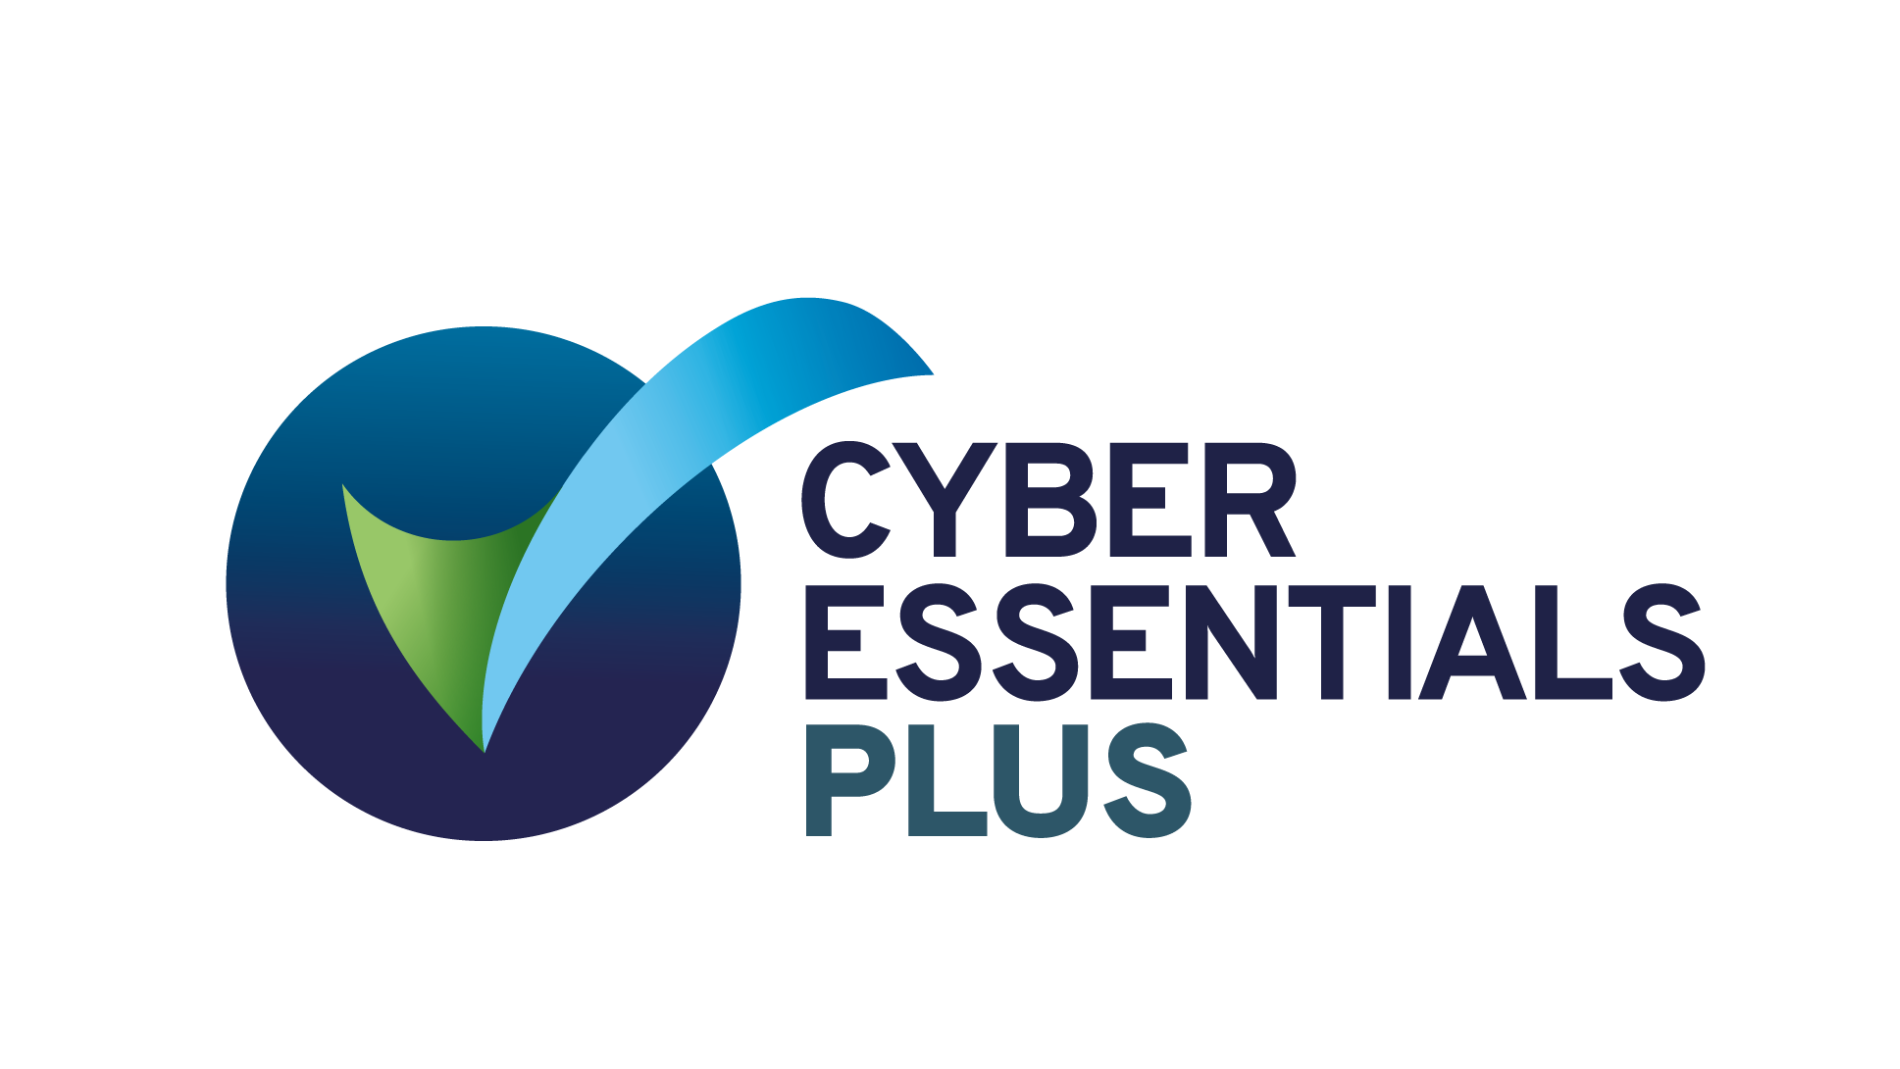 Foresight achieves cyber essentials plus certification